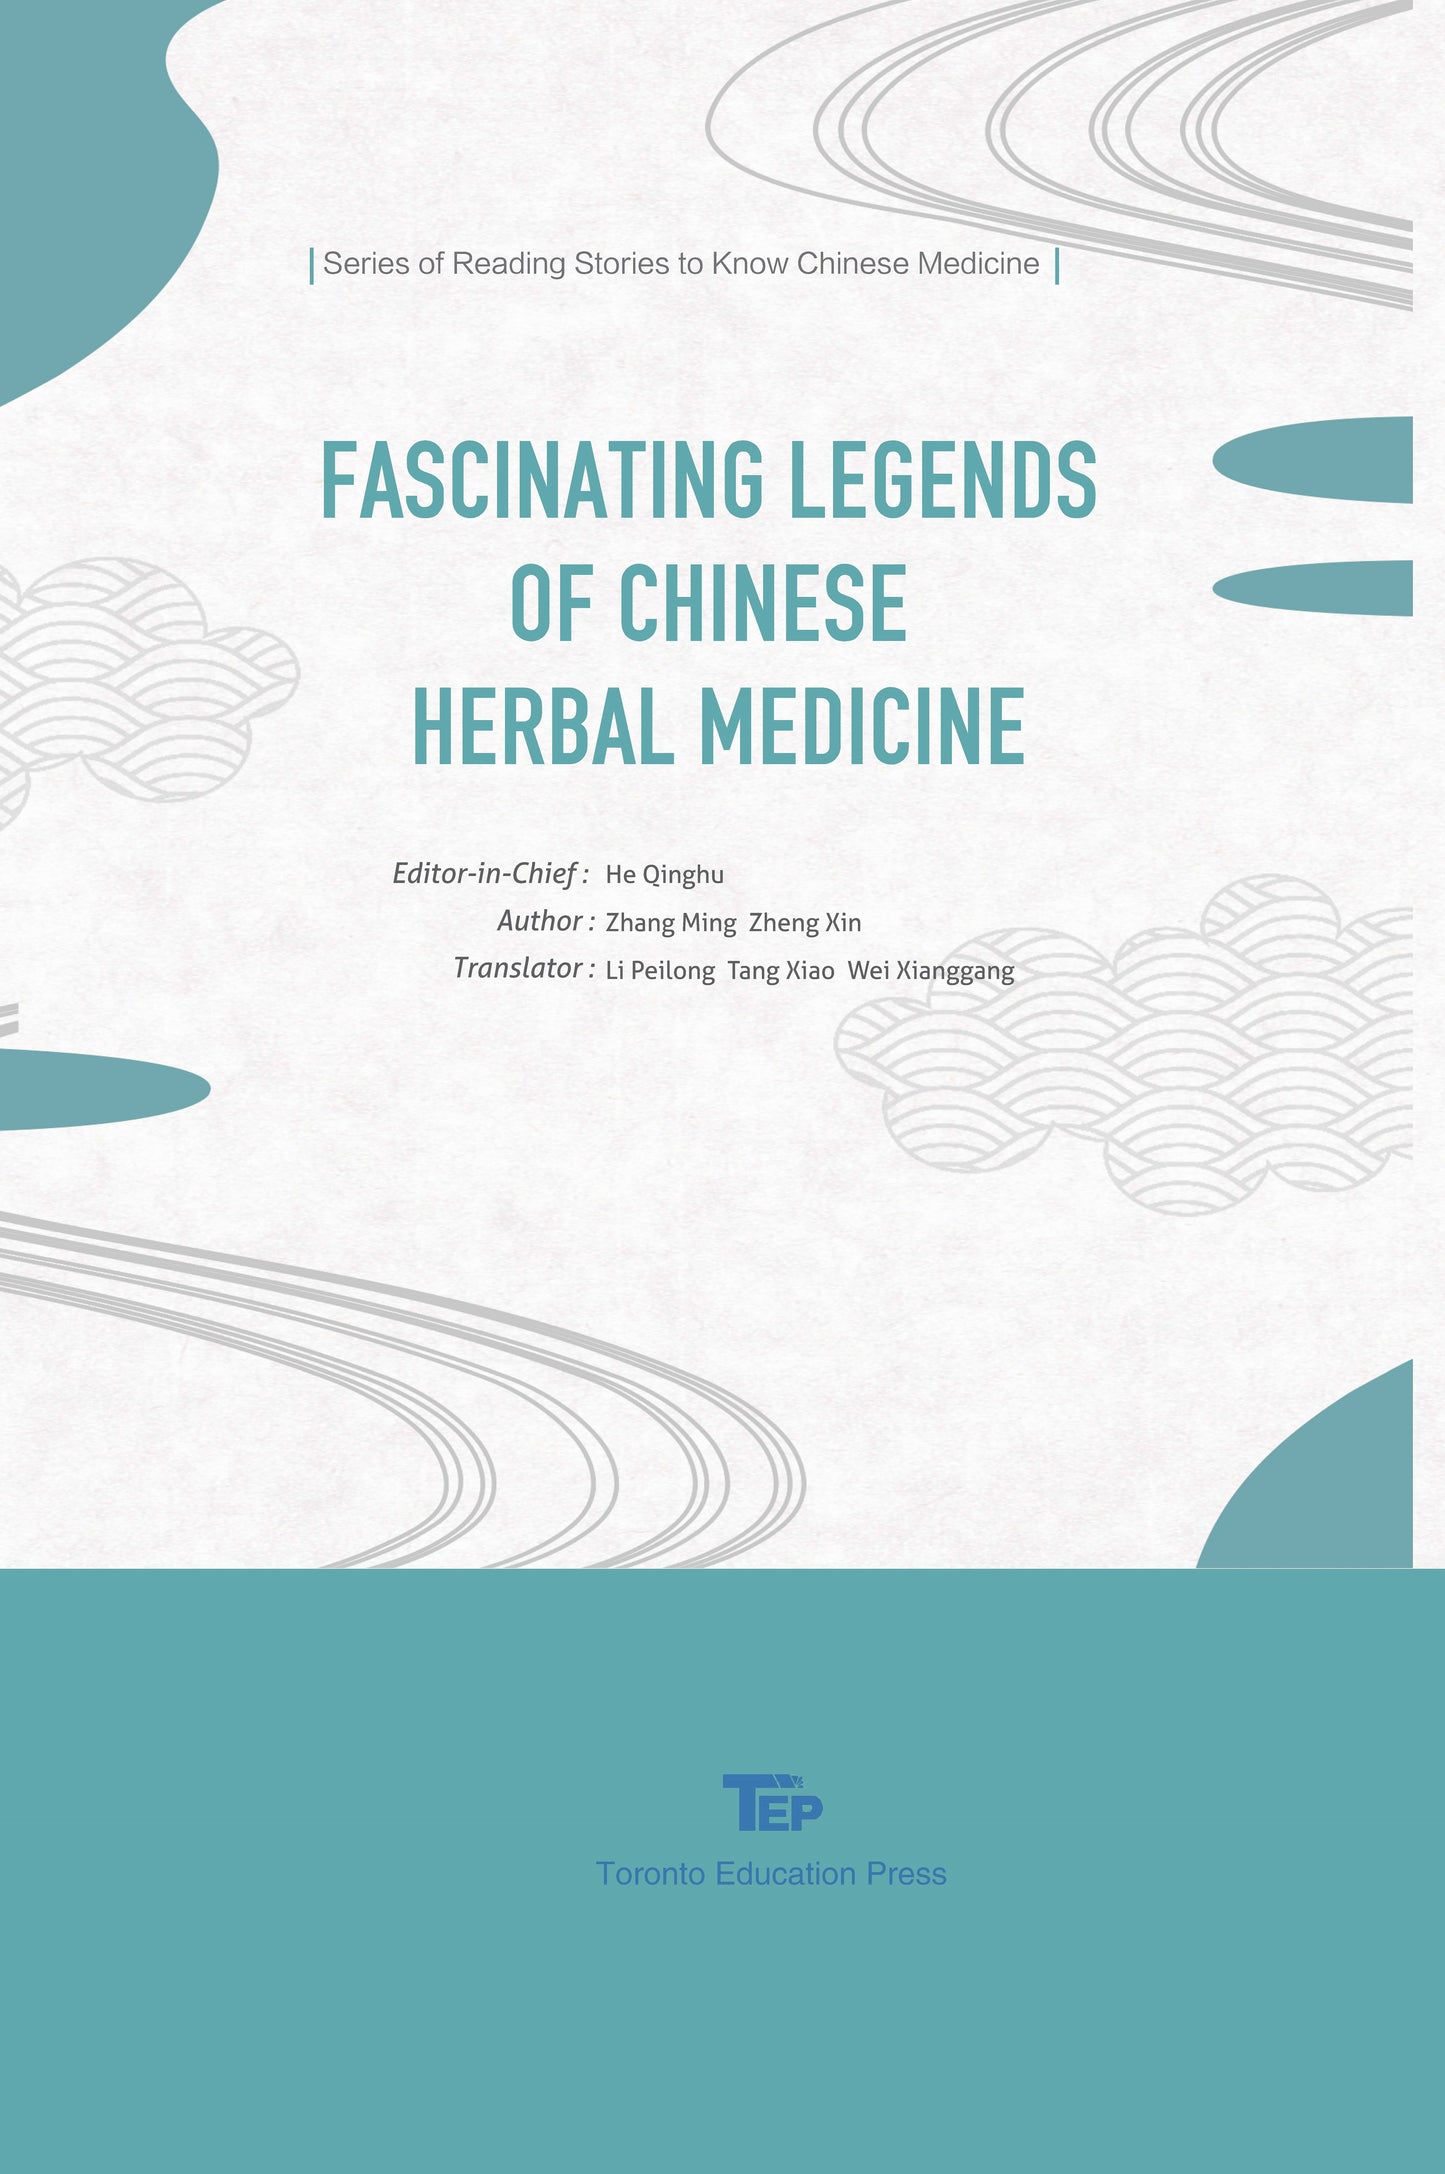 FASCINATING LEGENDS OF CHINESE HERBAL MEDICINE